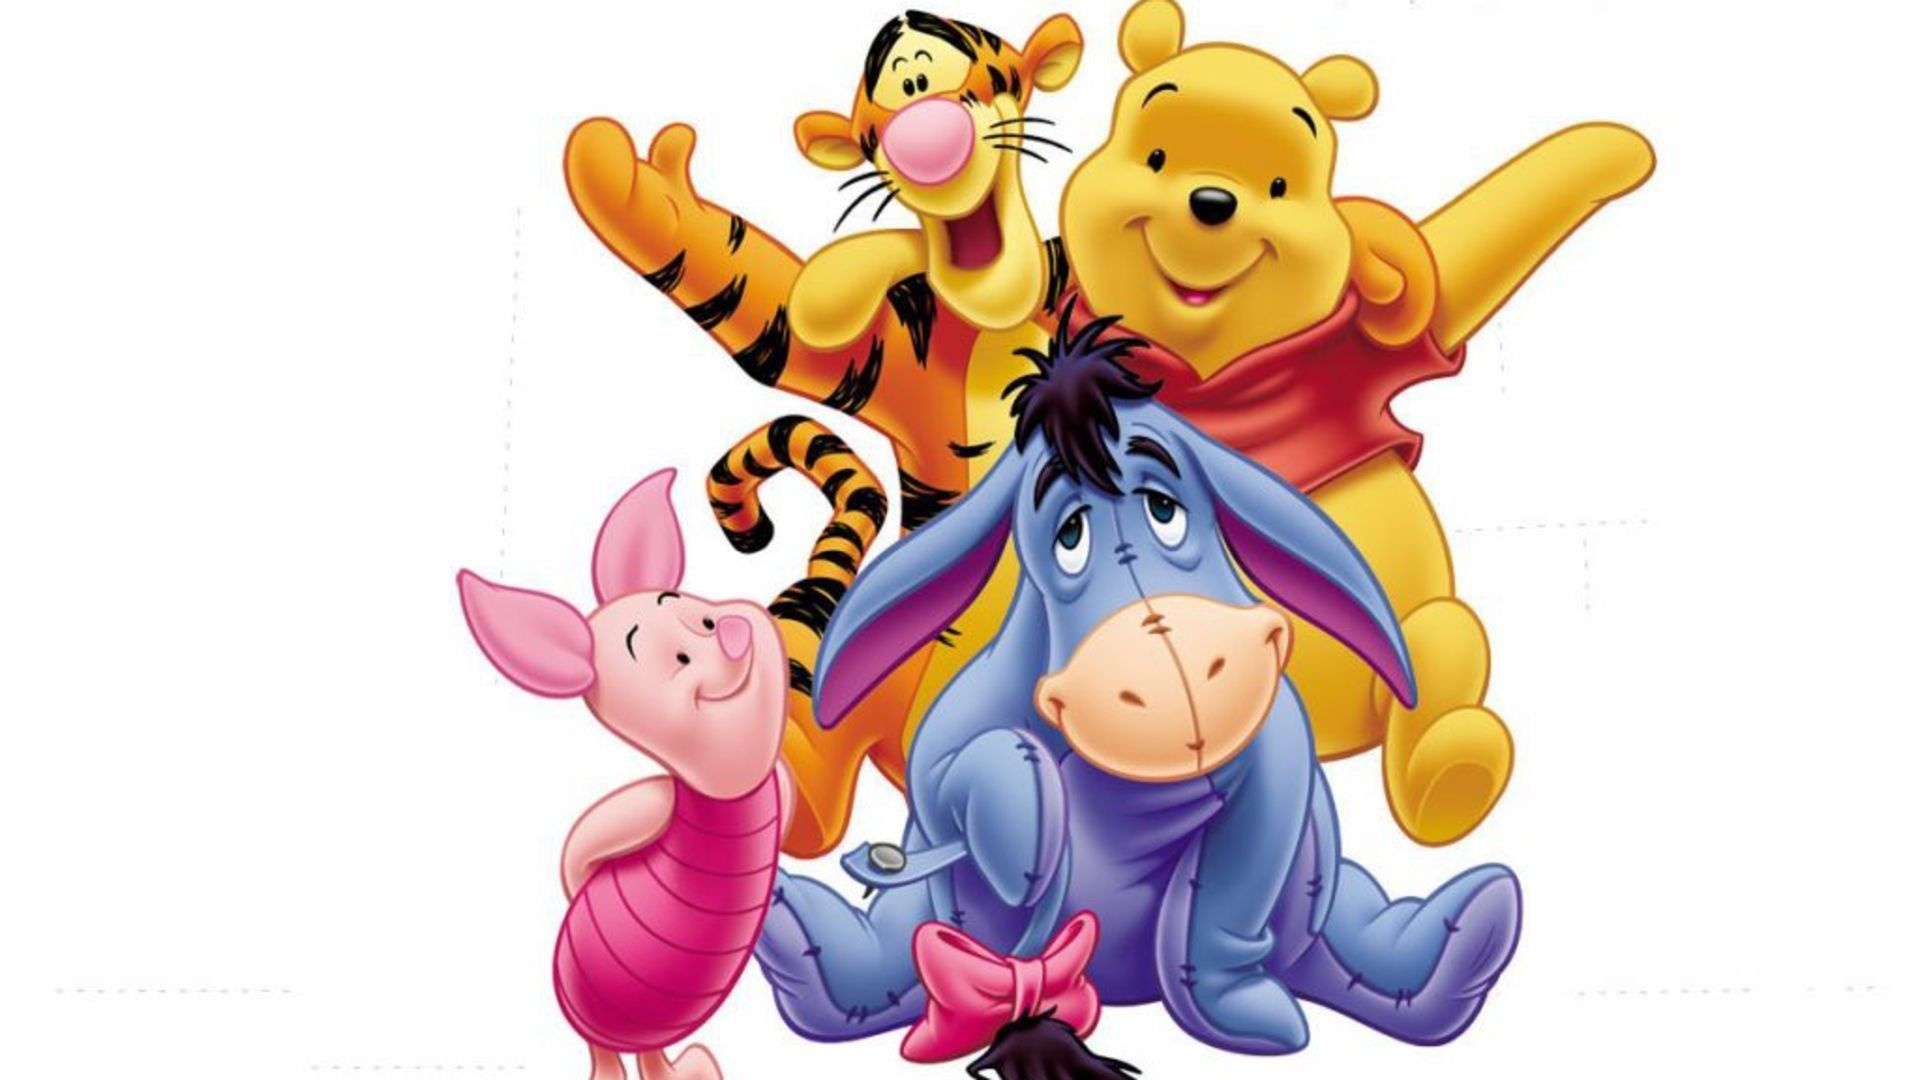 Tigger, Winnie-the-Pooh animation, Winnie the Pooh character wallpapers, None specified, 1920x1080 Full HD Desktop